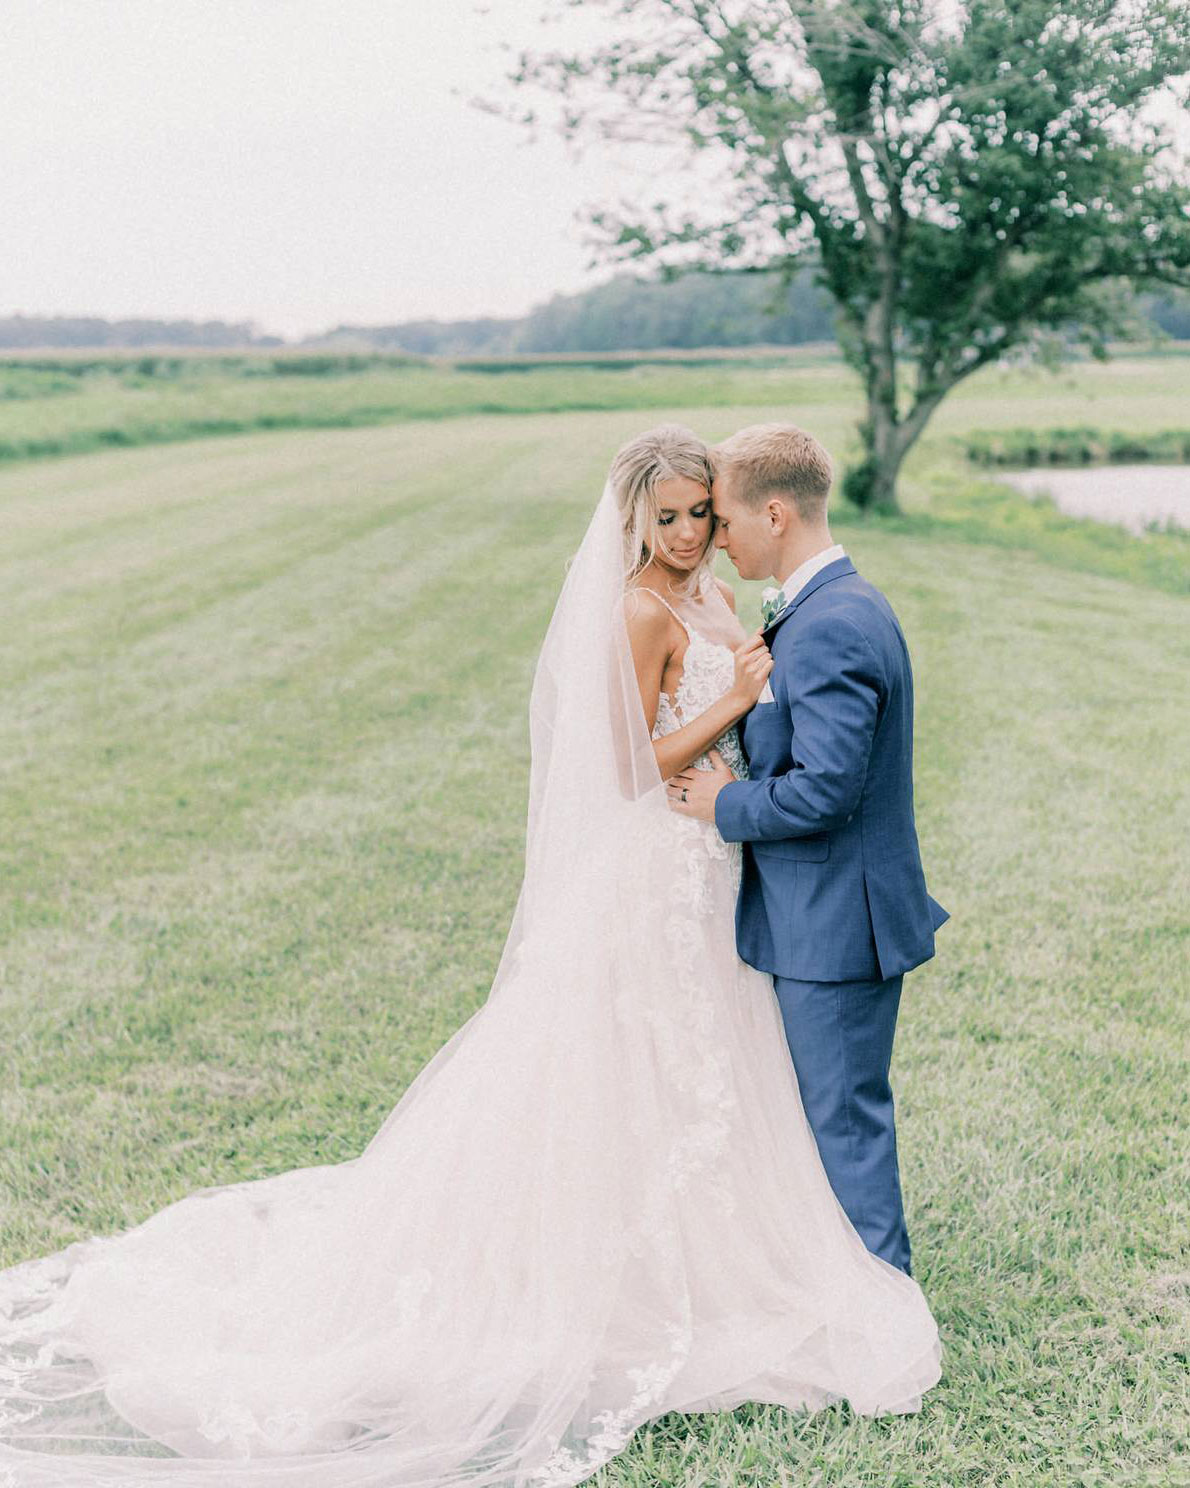 This Delaware Wedding Ceremony Is Truly One-of-a-Kind – Weddings Today